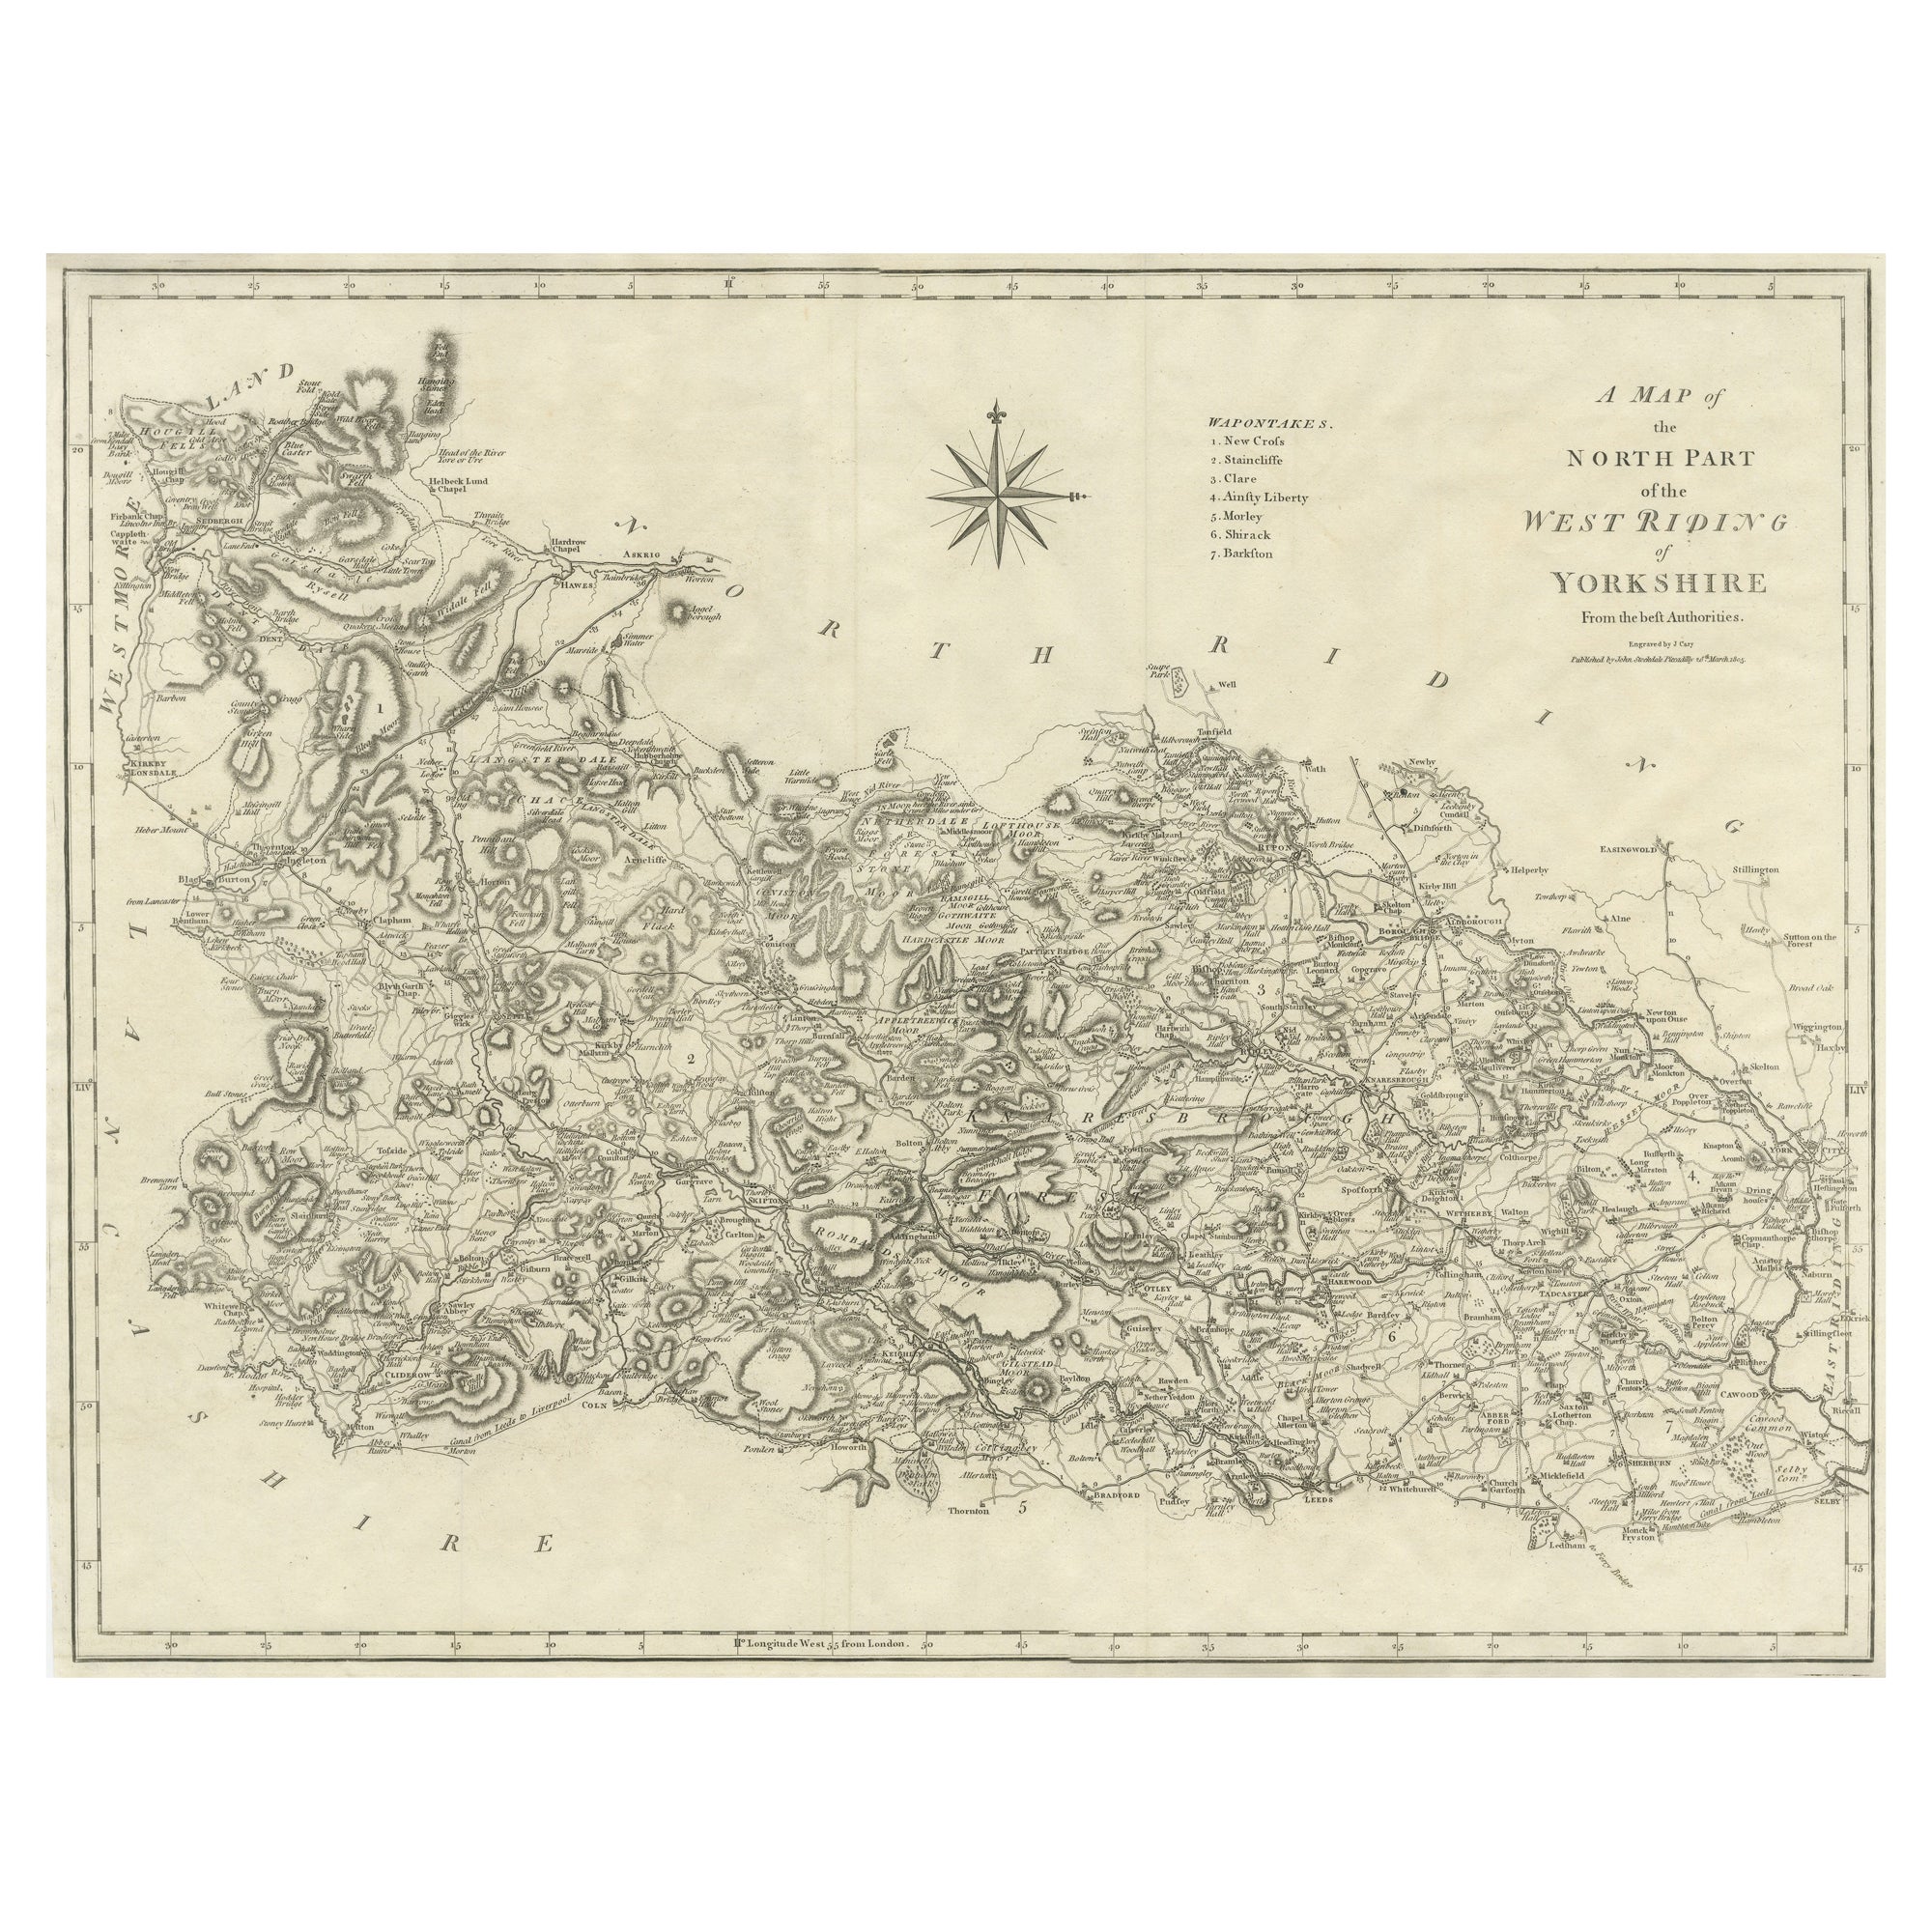 Large Antique County Map of the West Riding of Yorkshire 'North Part', England For Sale